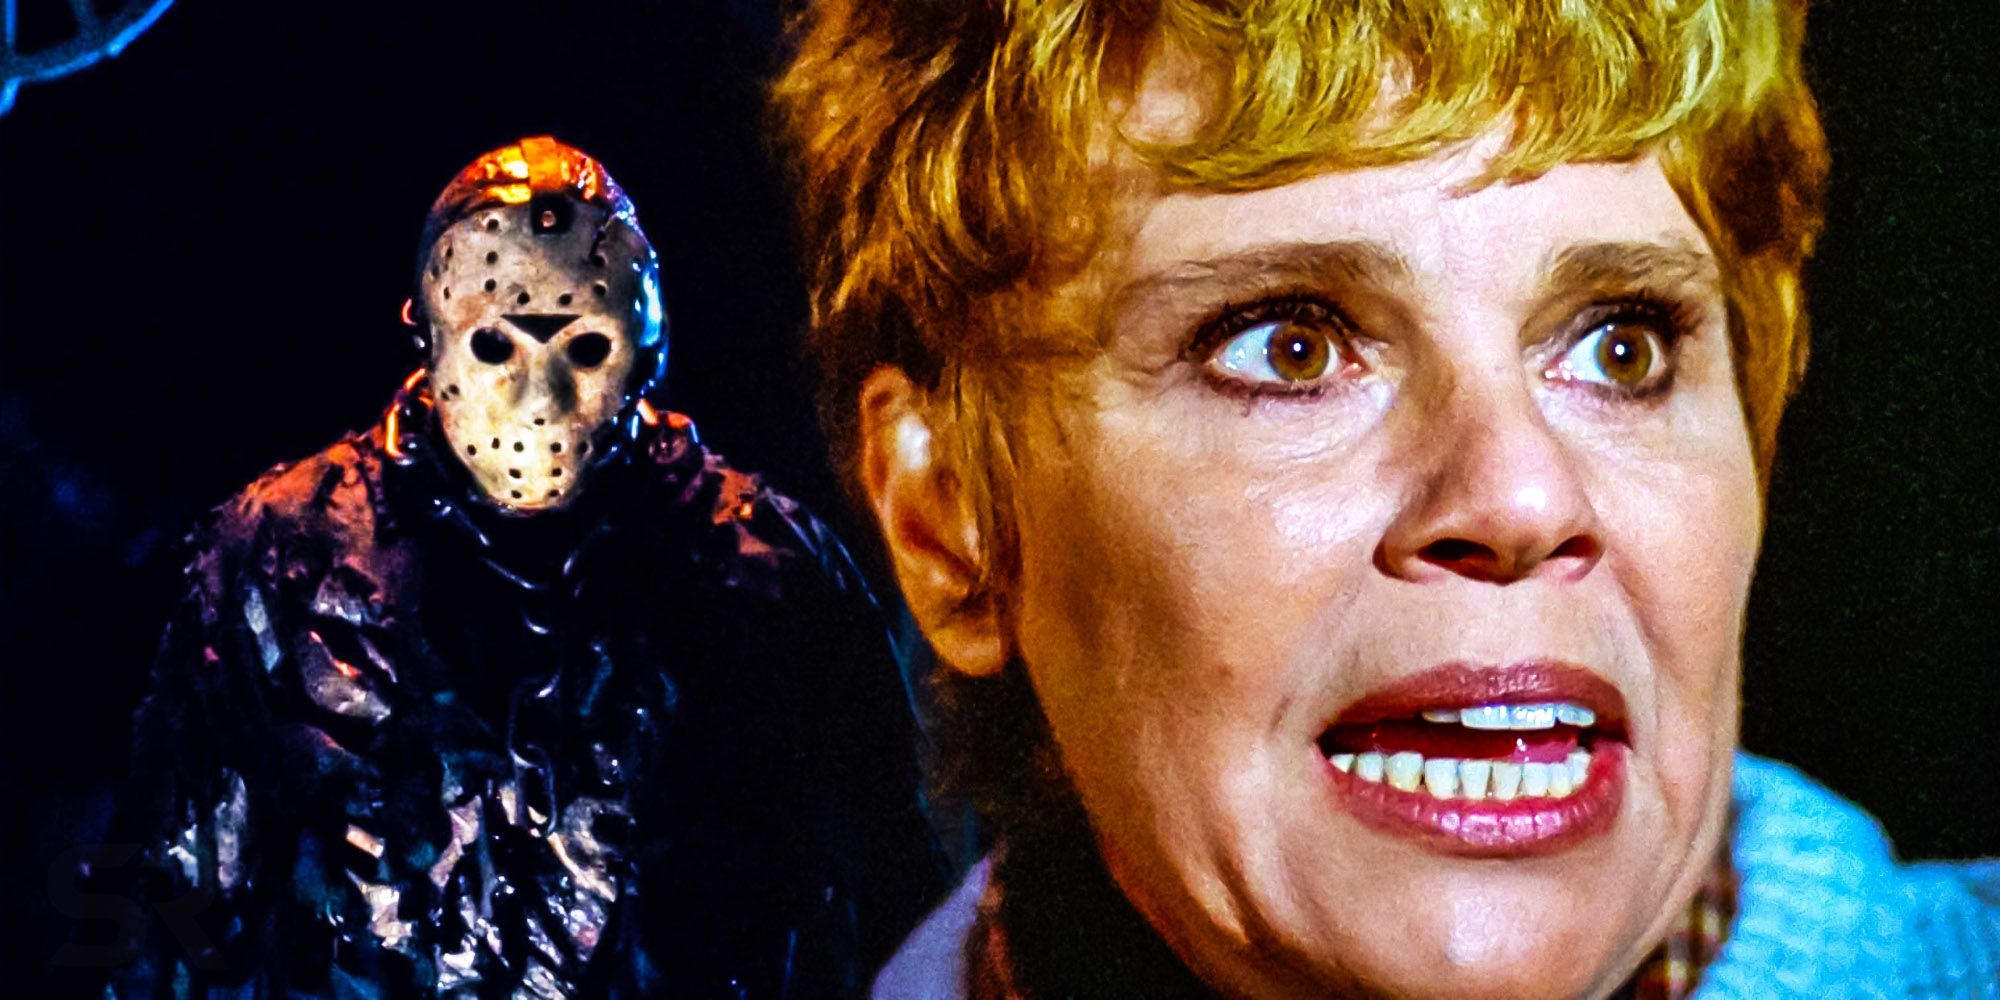 Friday the 13th part 7 jason pamela voorhees